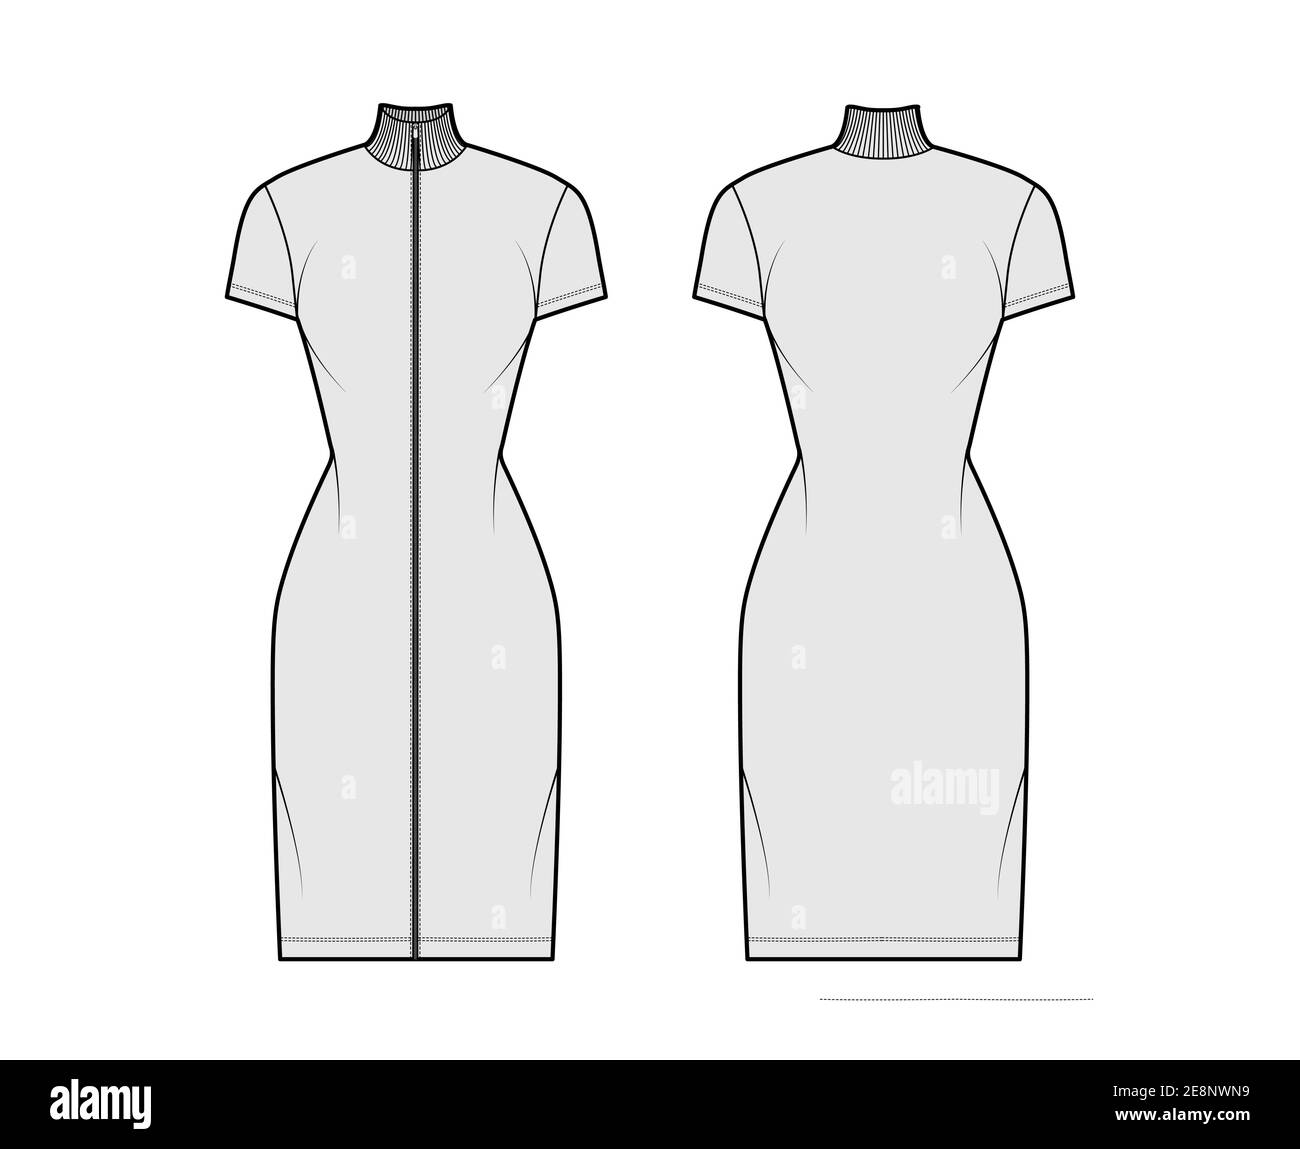 Turtleneck zip-up dress technical fashion illustration with short sleeves, knee length, fitted body, Pencil fullness. Flat apparel template front, back, grey color. Women, men, unisex CAD mockup Stock Vector